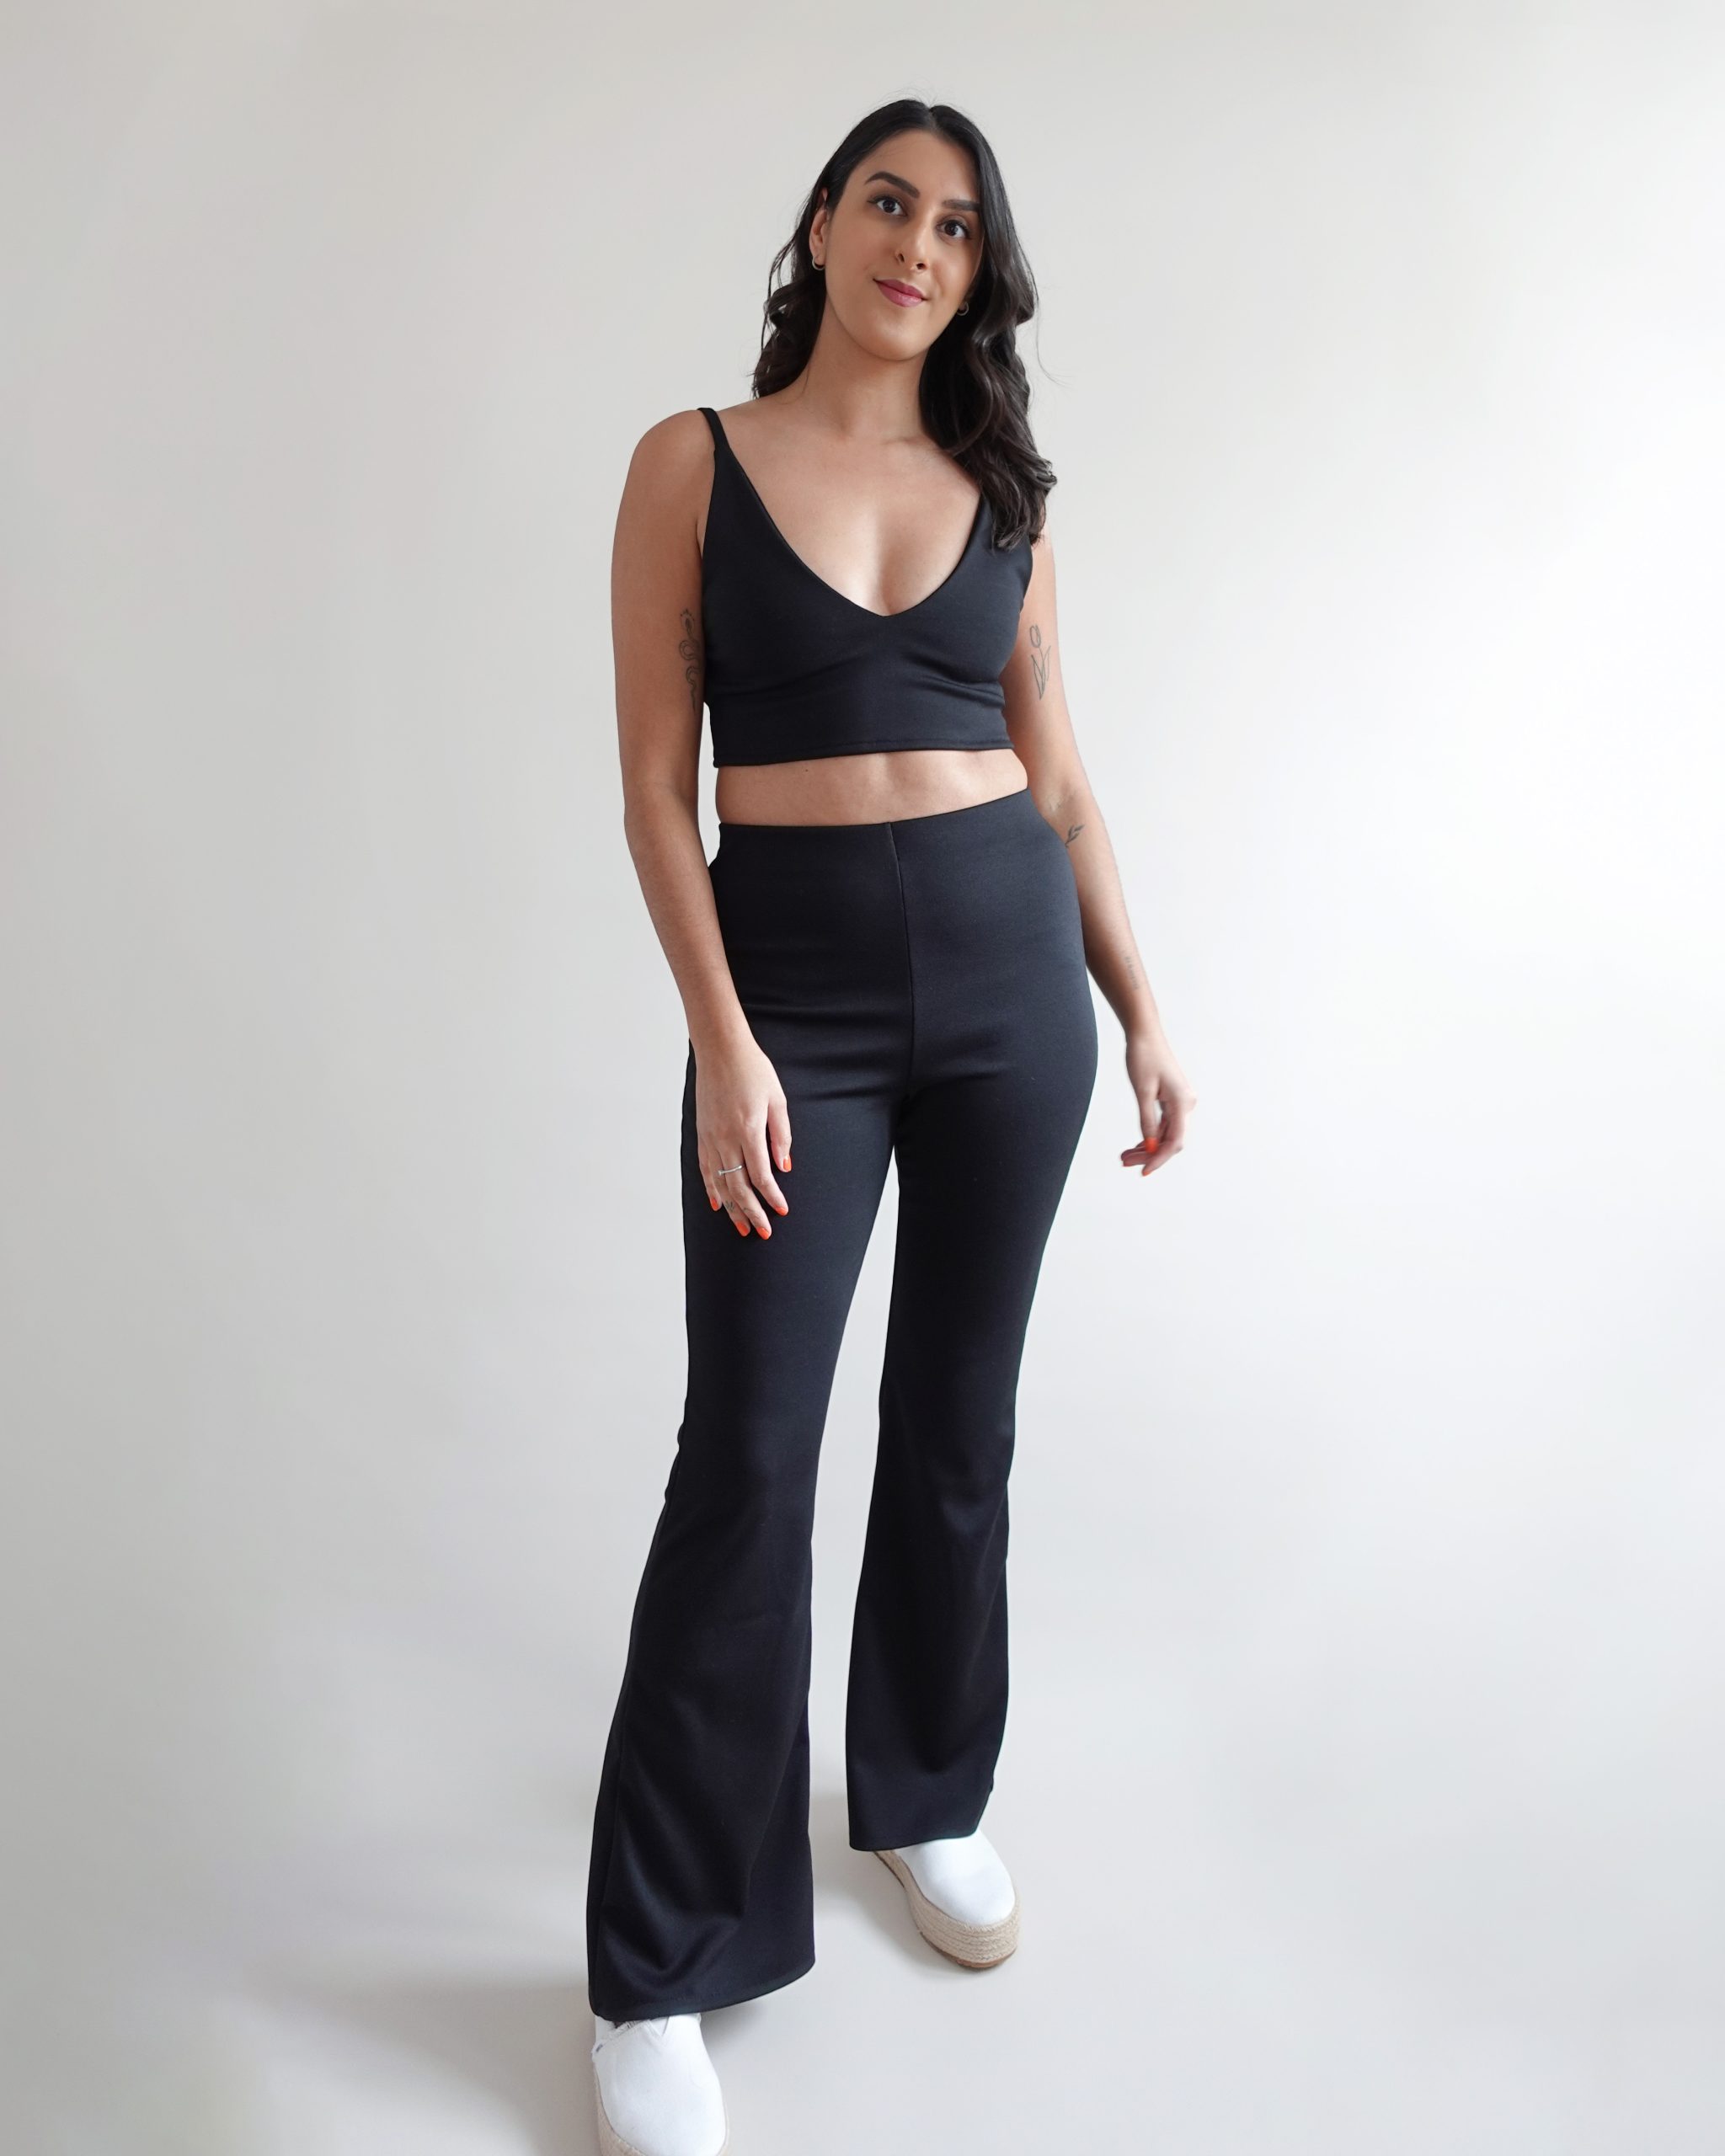 Woman wearing the Freya Flare Trouser sewing pattern from Tammy Handmade on The Fold Line. A trouser pattern made in jersey, ribbed knit, sweater knit, or ponte roma fabrics, featuring a high-waist, elasticated waistband, and flared leg.